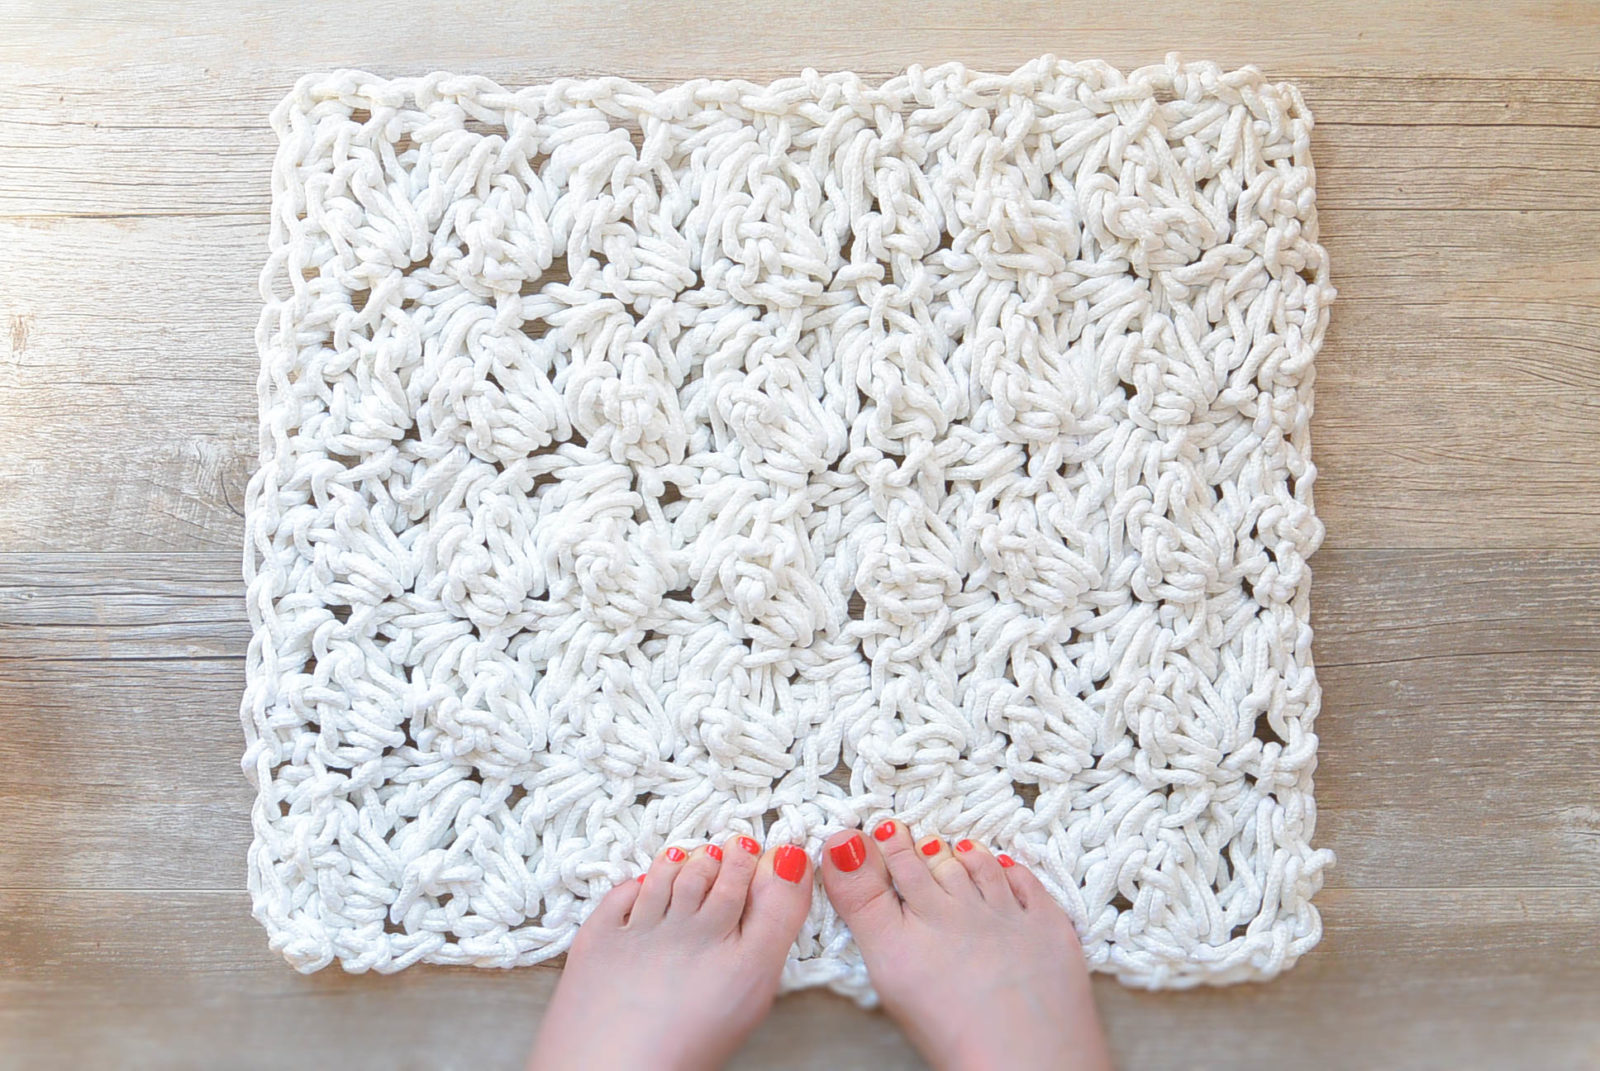 Bath Mats vs. Bath Rugs: Here's What You Should Know